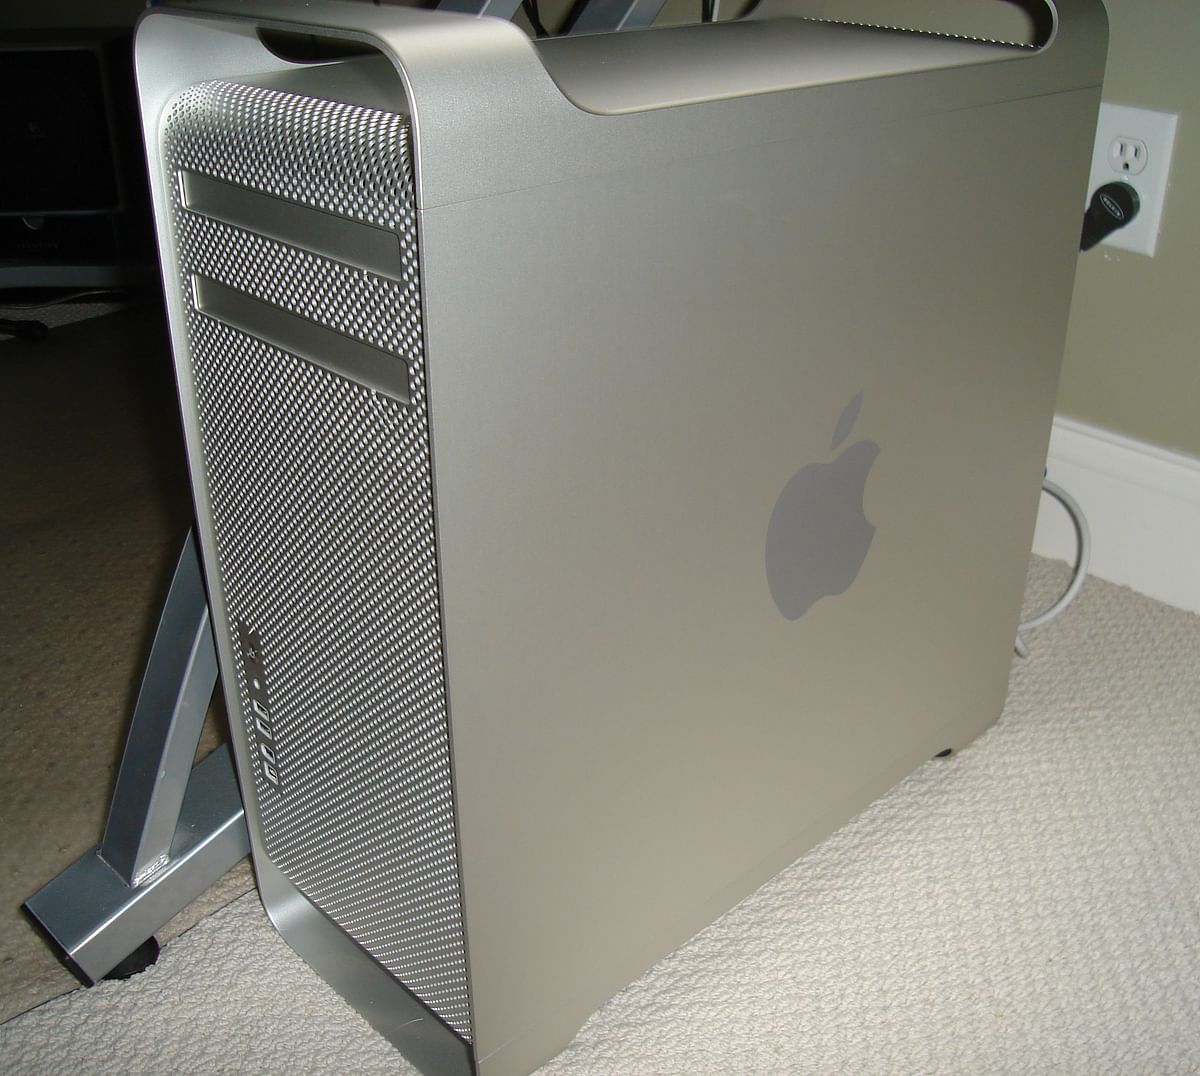 The new Mac Pro, that can house upto 24 cores and four GPU’s will start at $5,999.